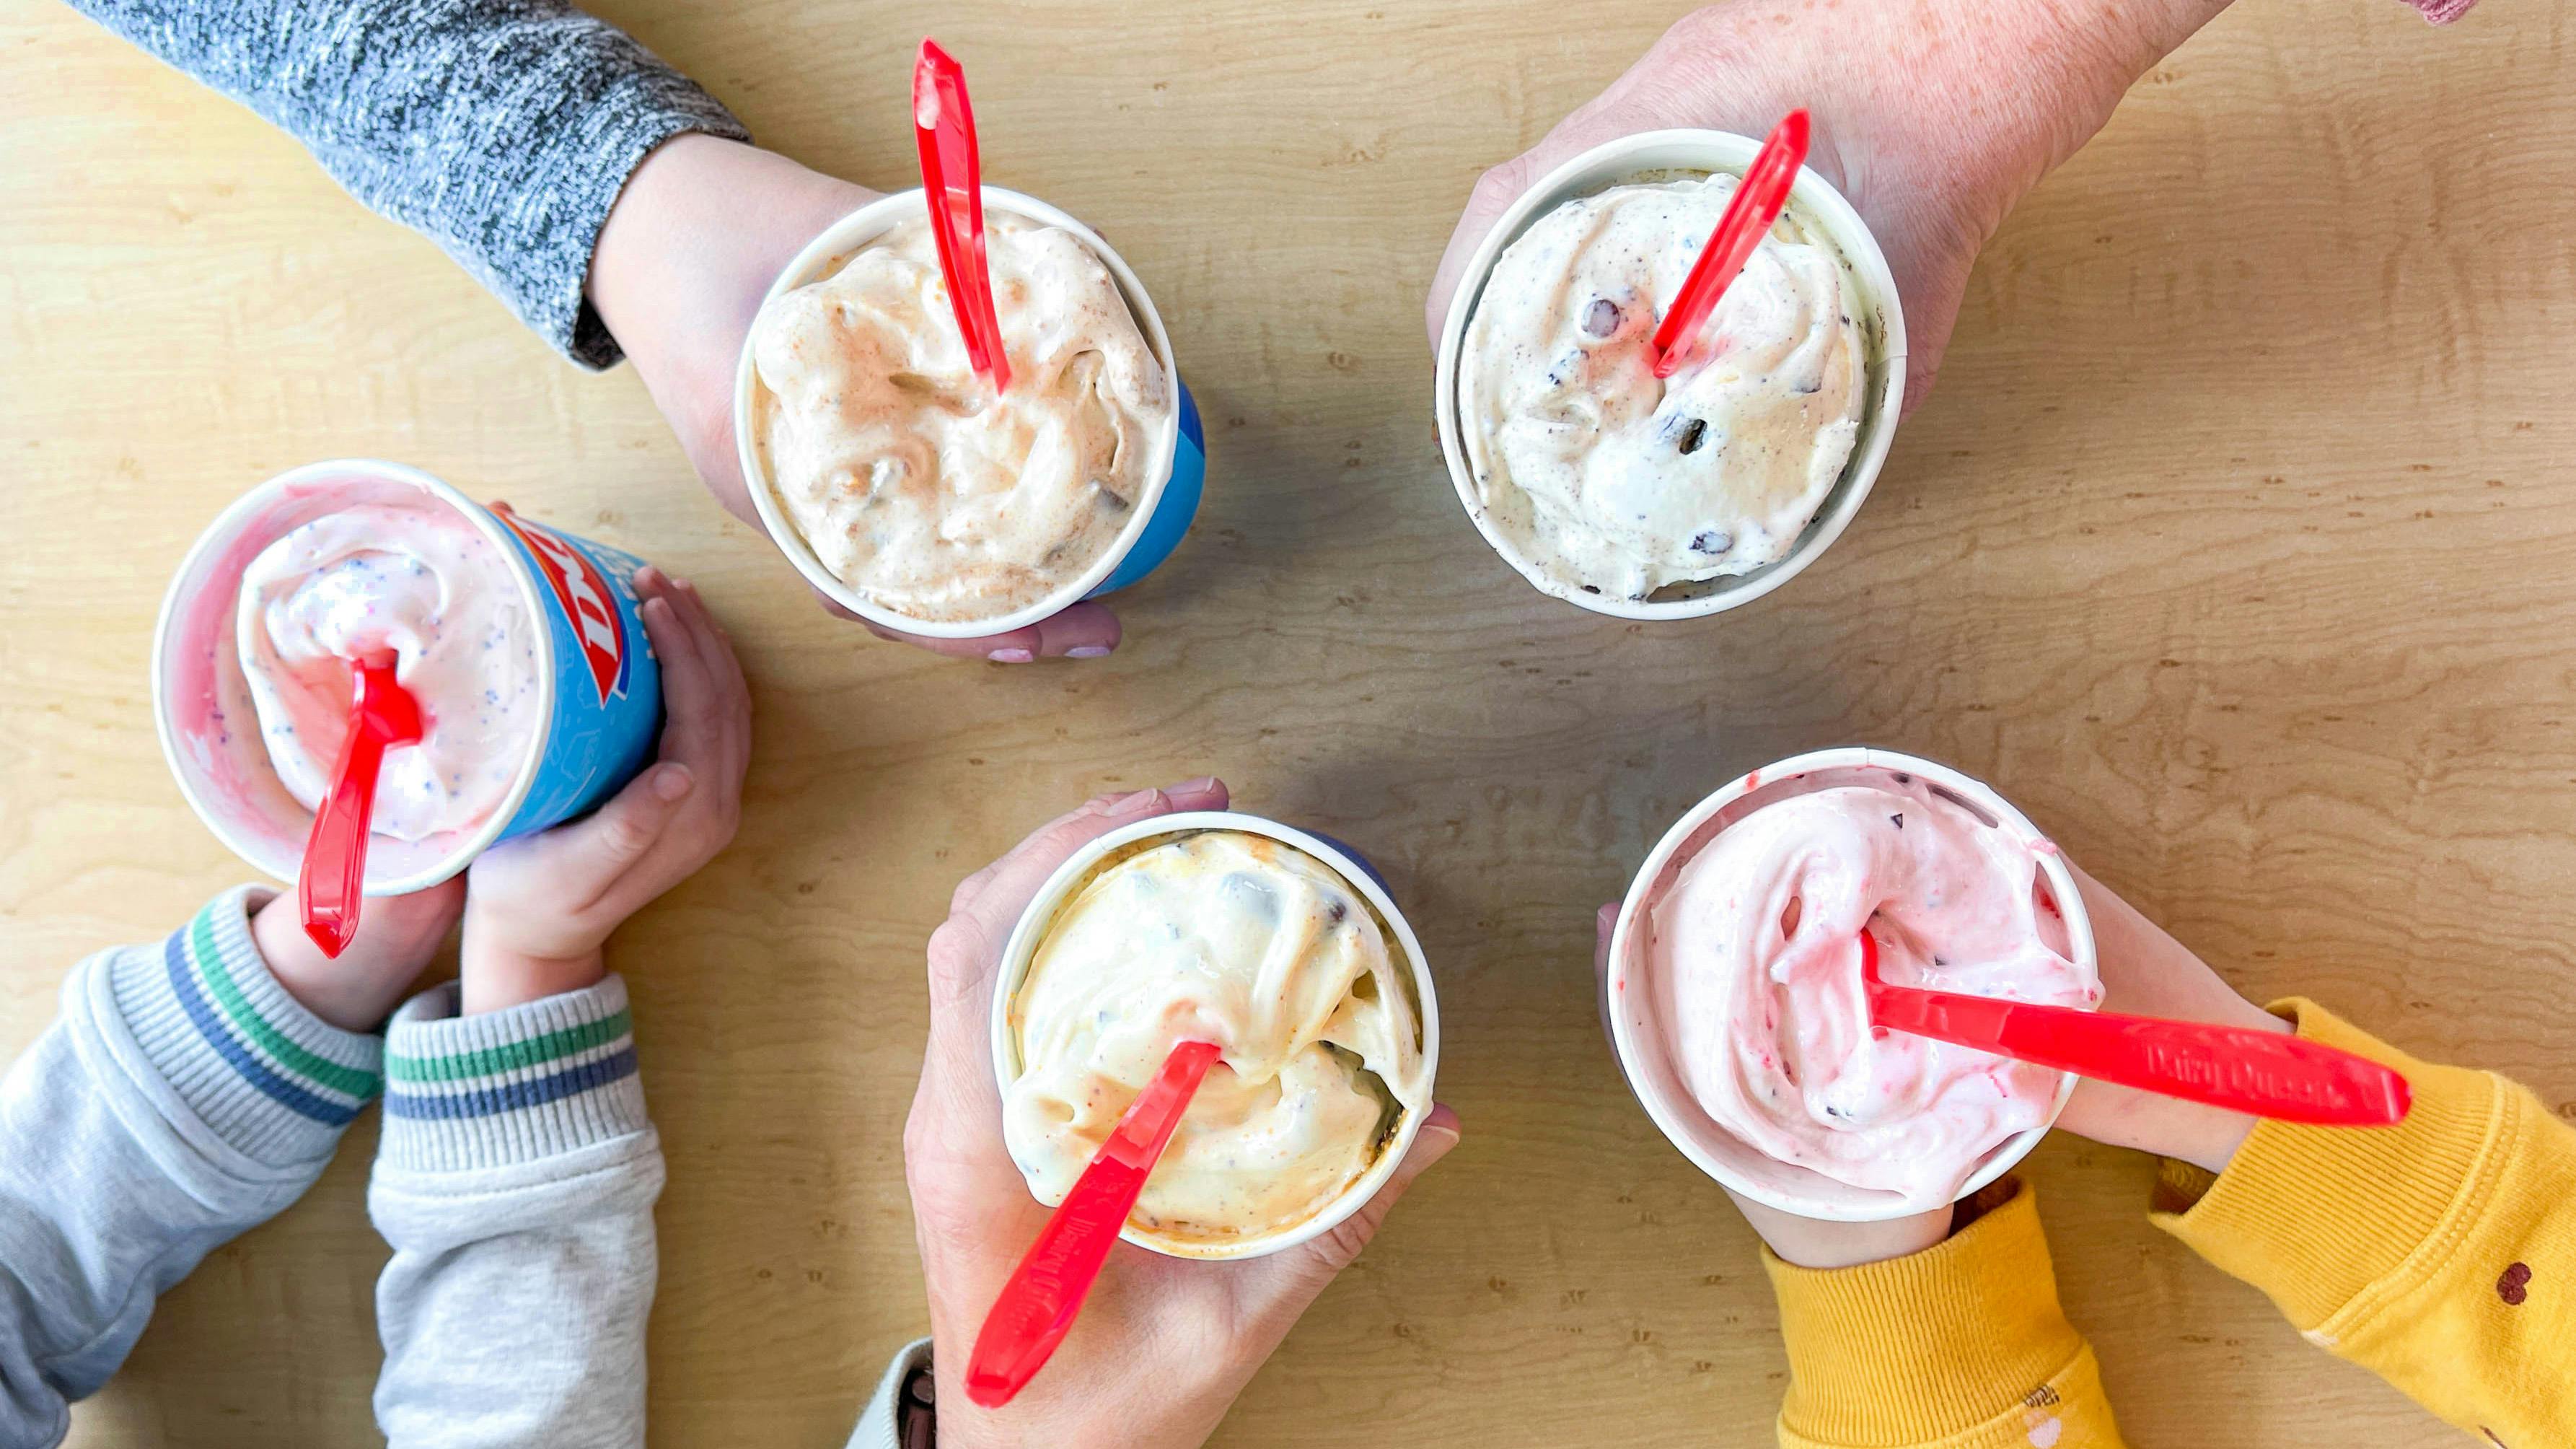 Dairy Queen is selling 85cent Blizzards starting today. Here's where